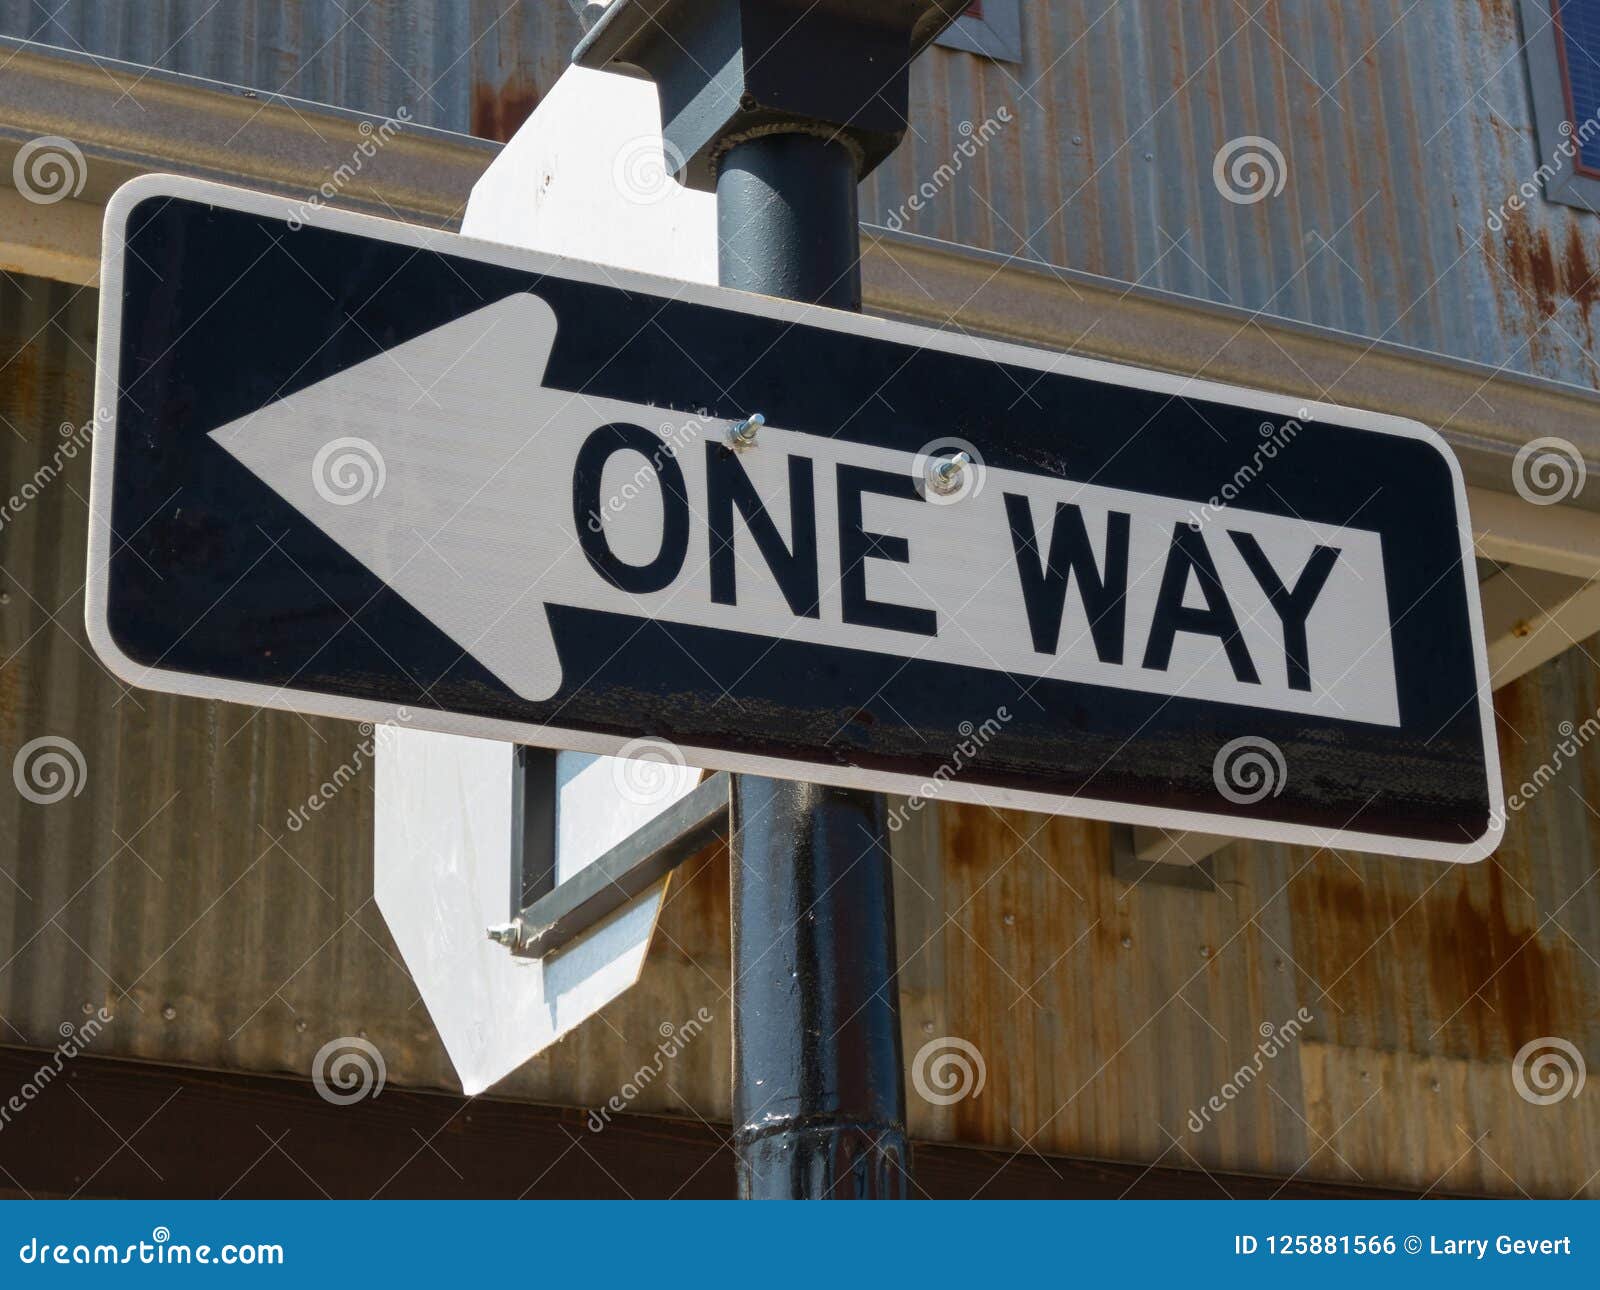 One way street sign stock photo. Image of button, city ...
 One Way Street Signs